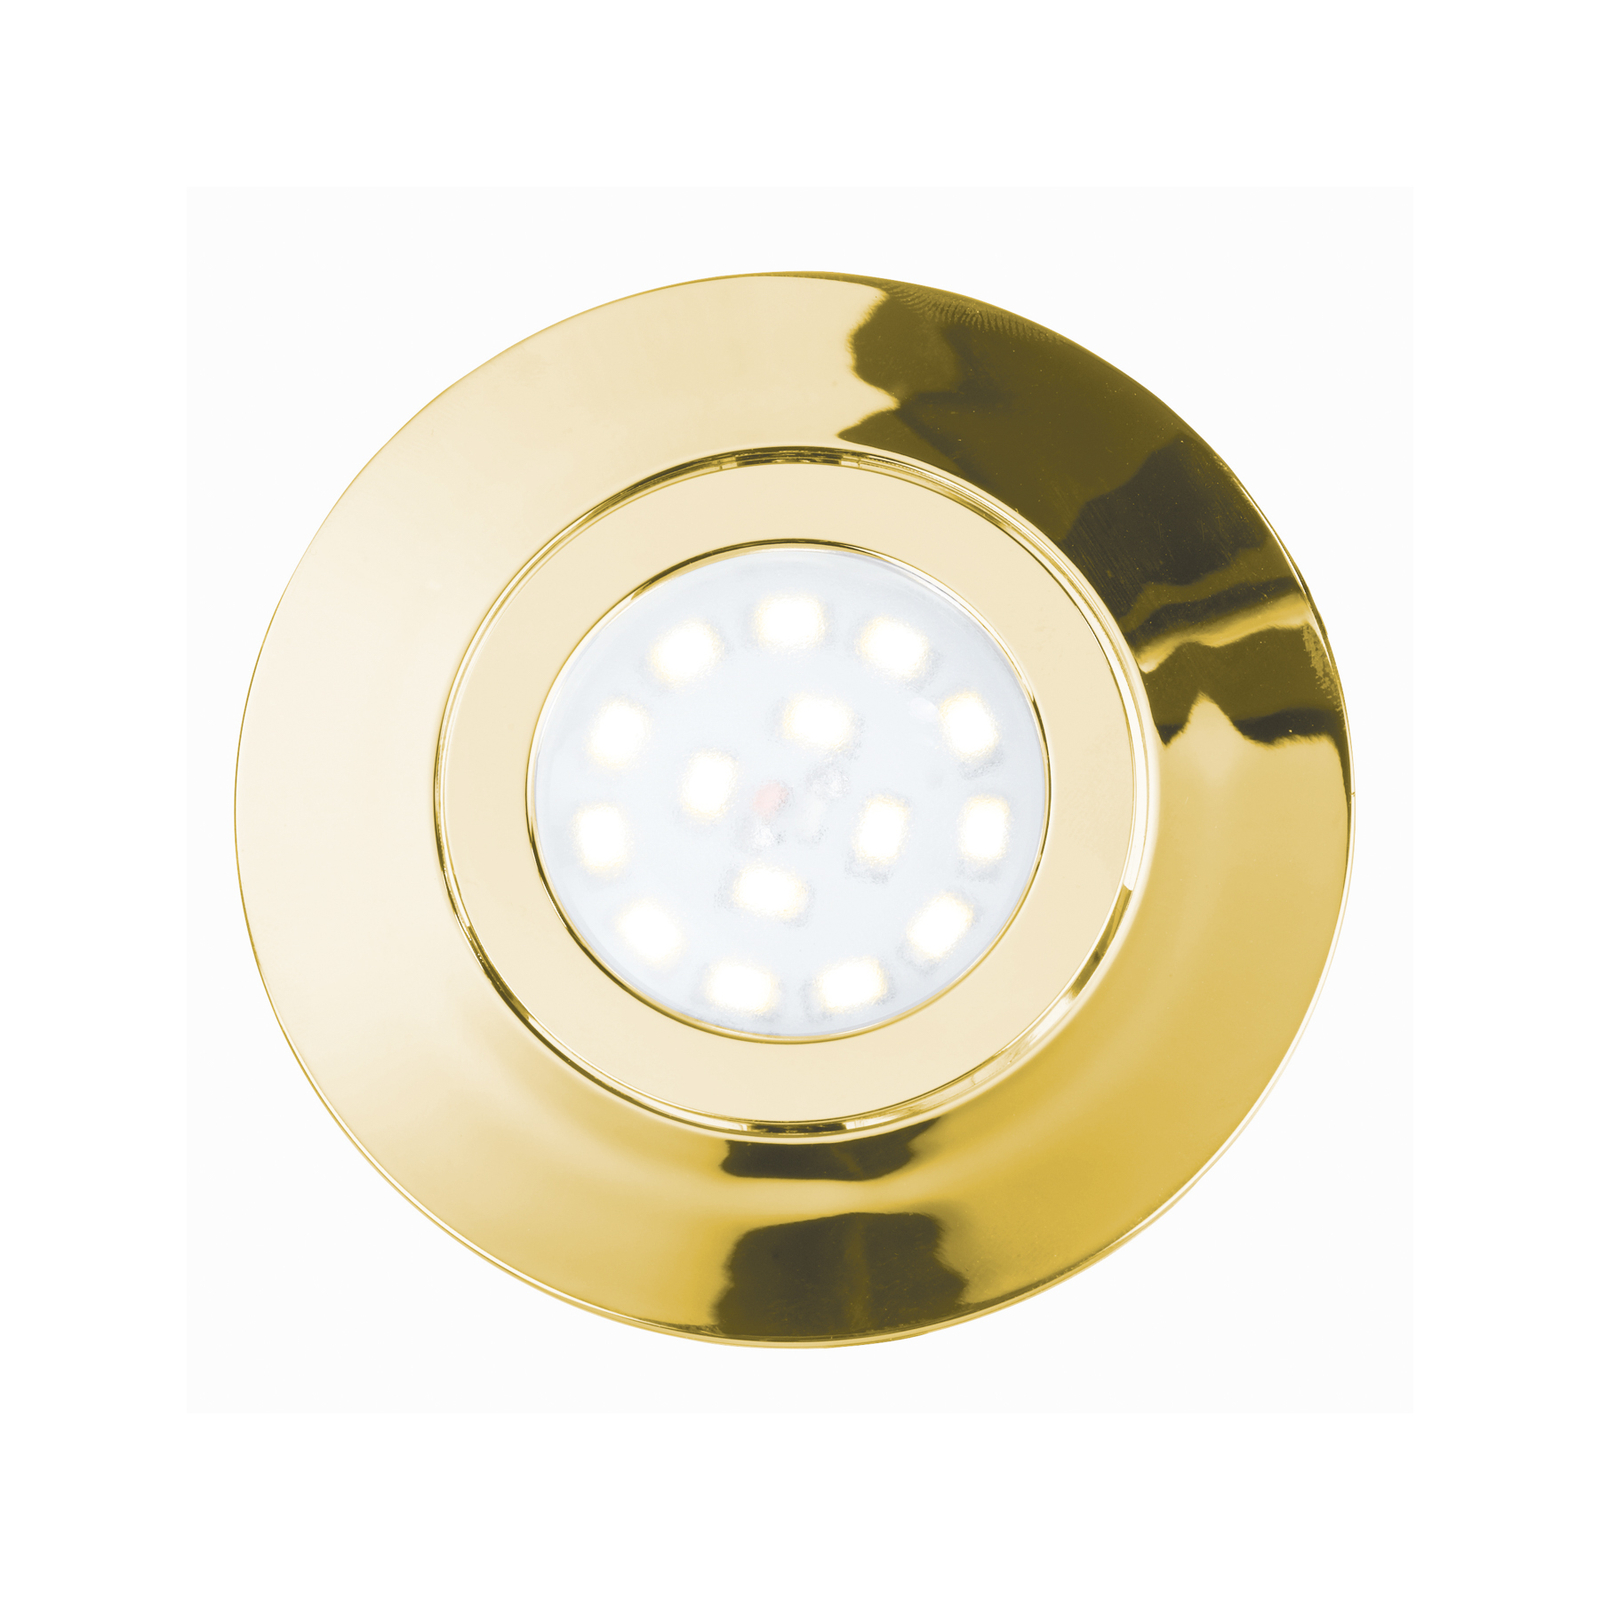 Zenit LED downlight with IP44, gold